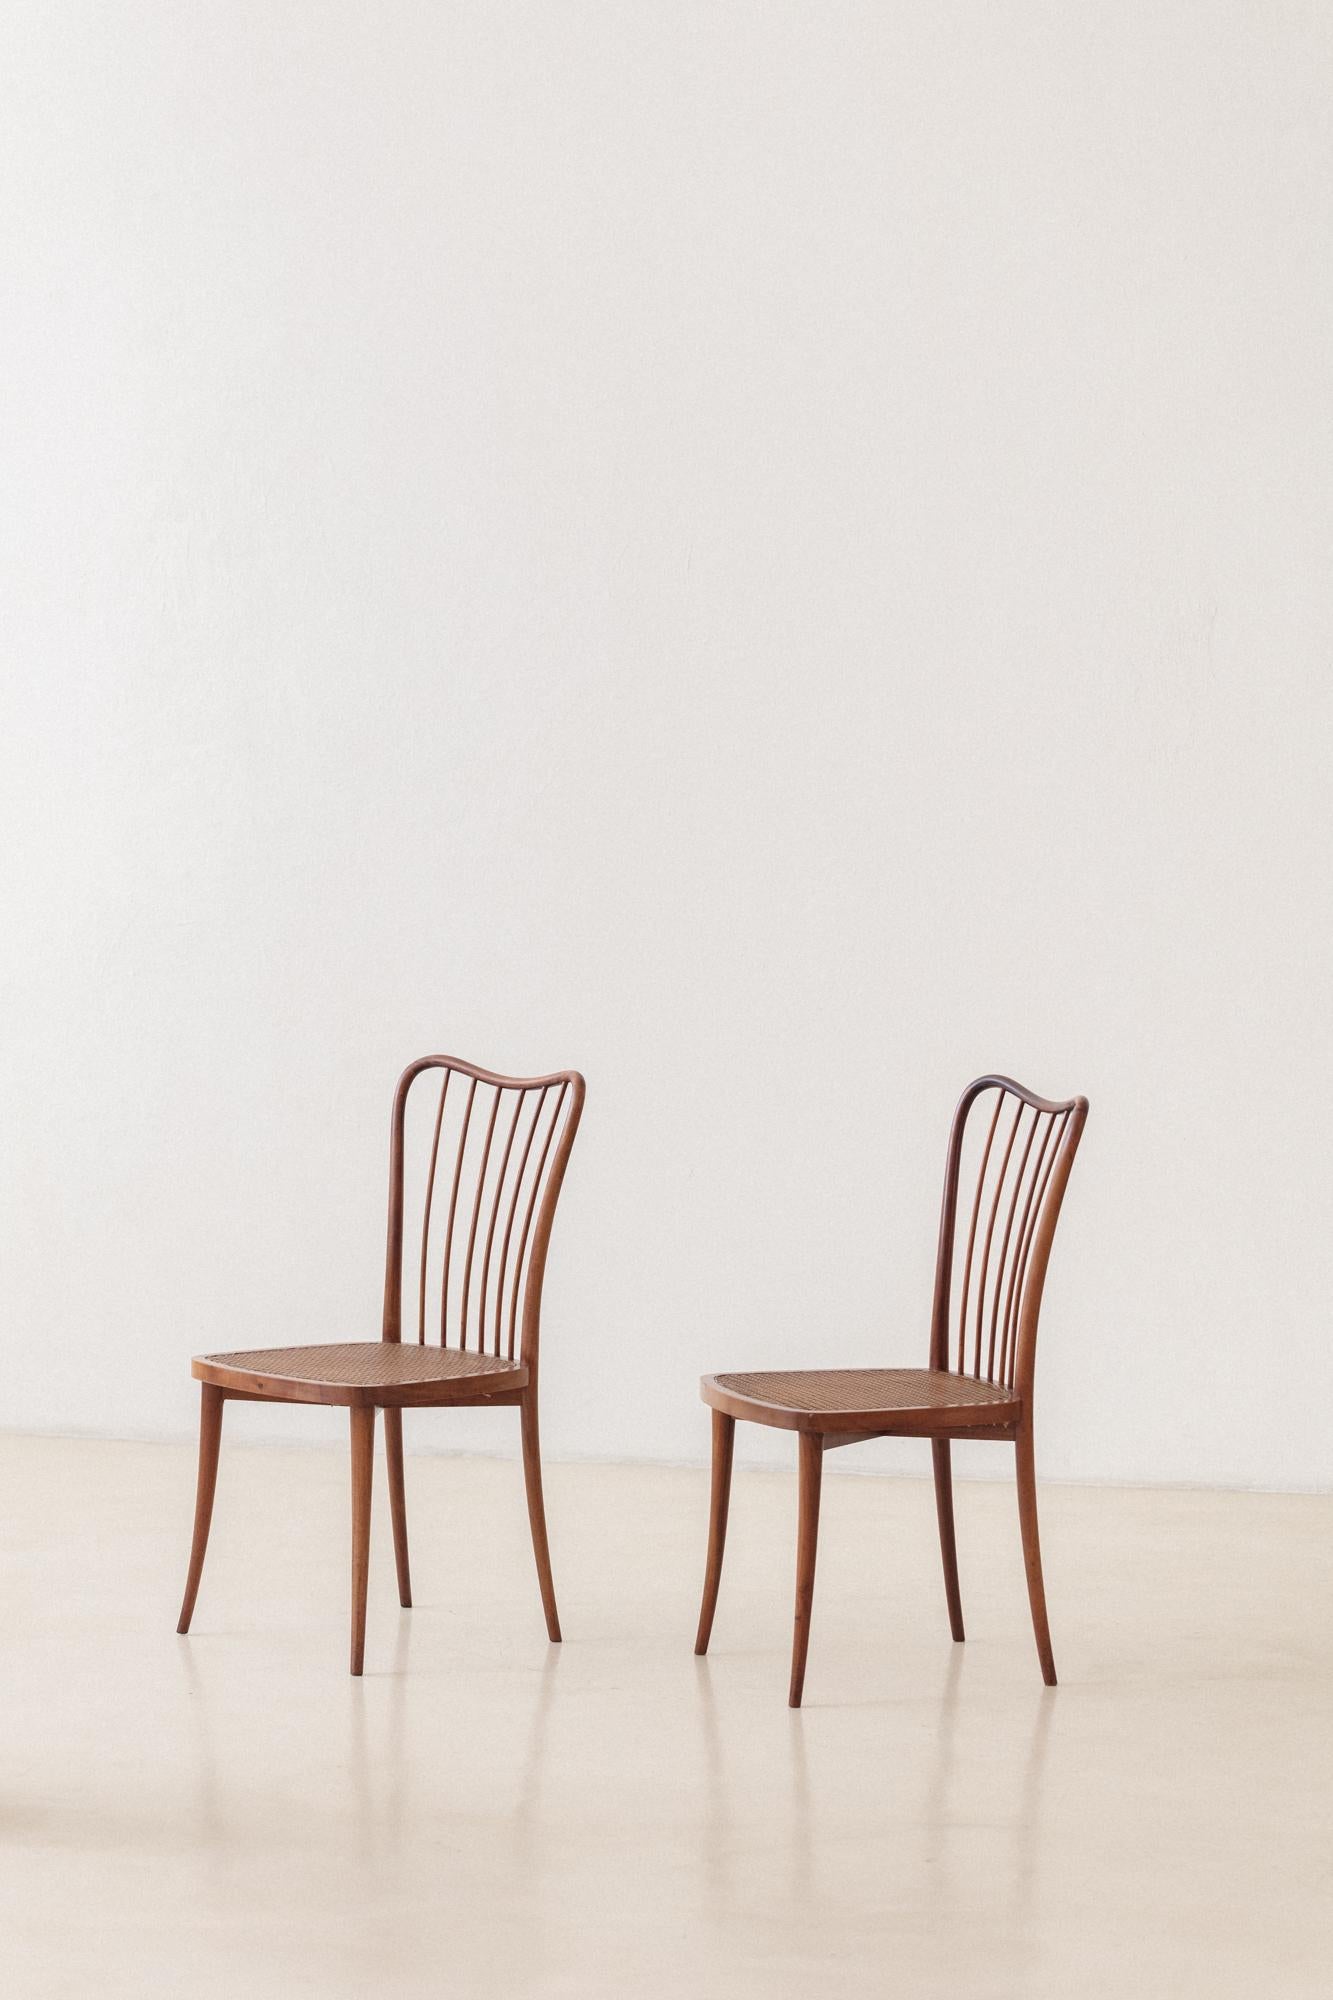 Hand-Crafted Set of Eight Dining Chairs by Joaquim Tenreiro, Solid Wood and Cane, 1950s For Sale